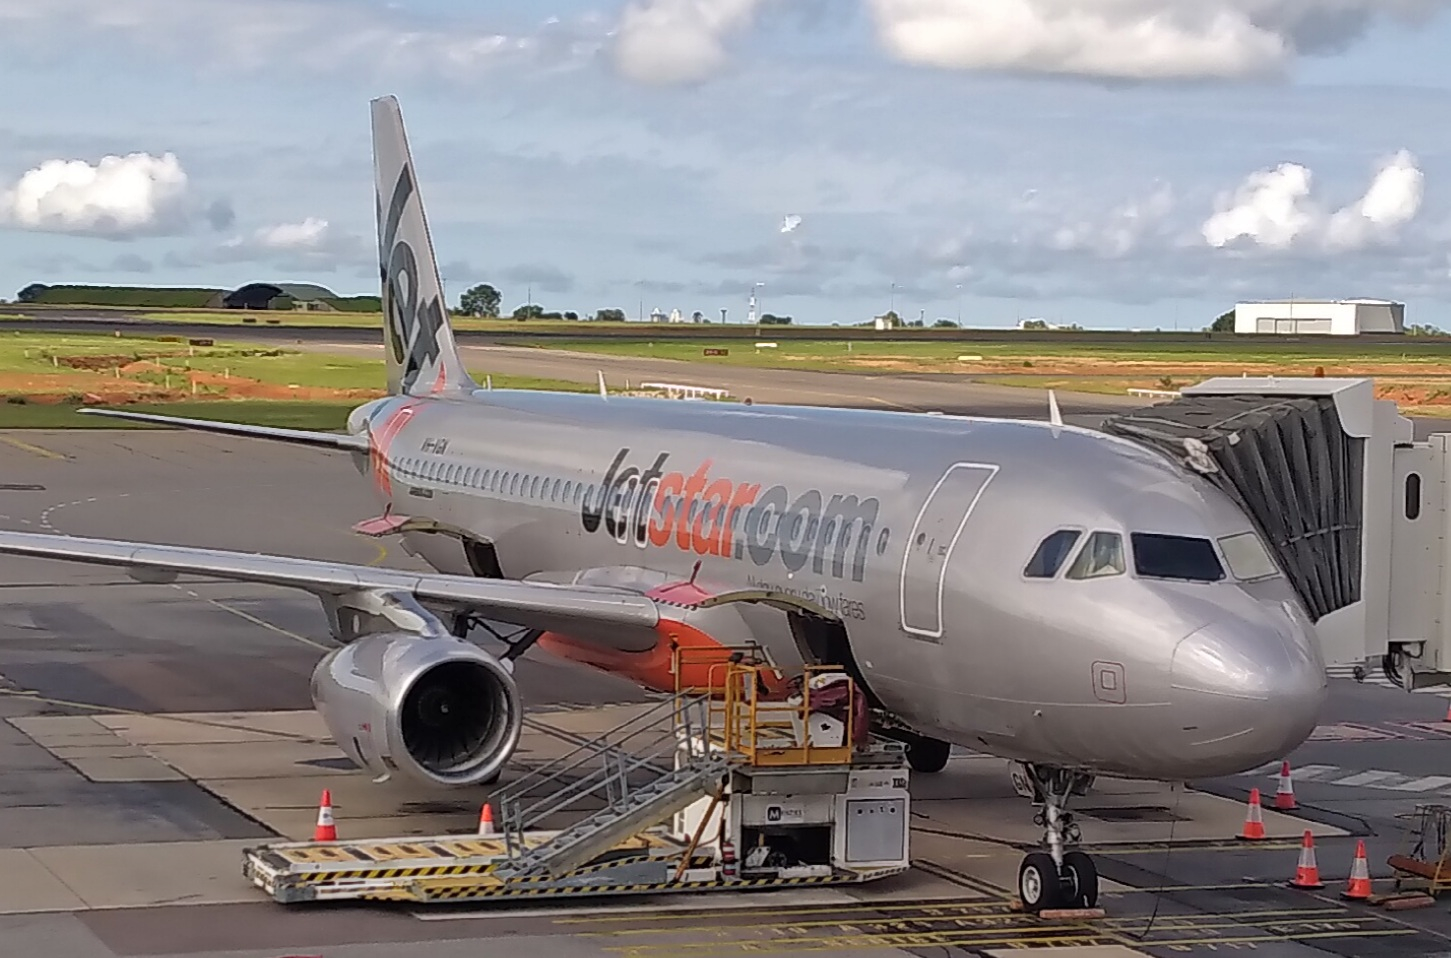 Which Airline Owns Darwin?